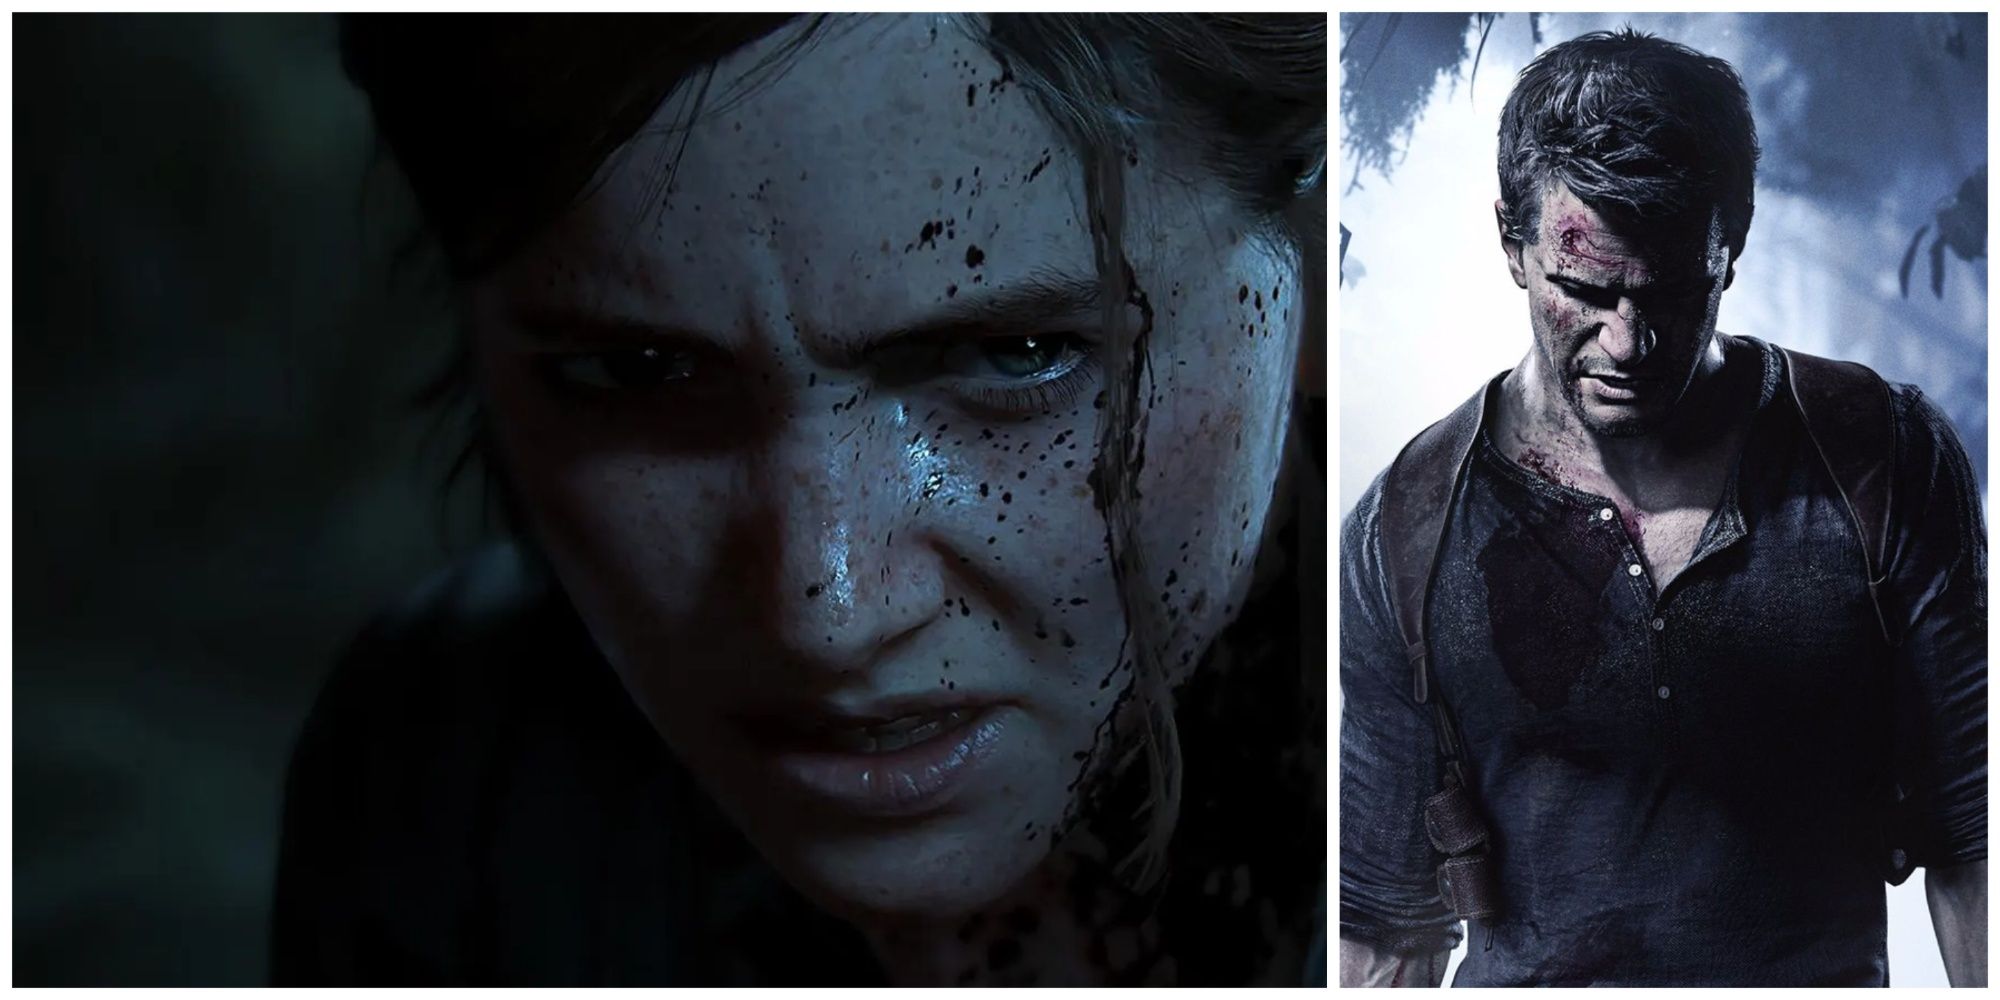 Ellie from The Last of Us Part 2 and Nathan Drake from Uncharted 4